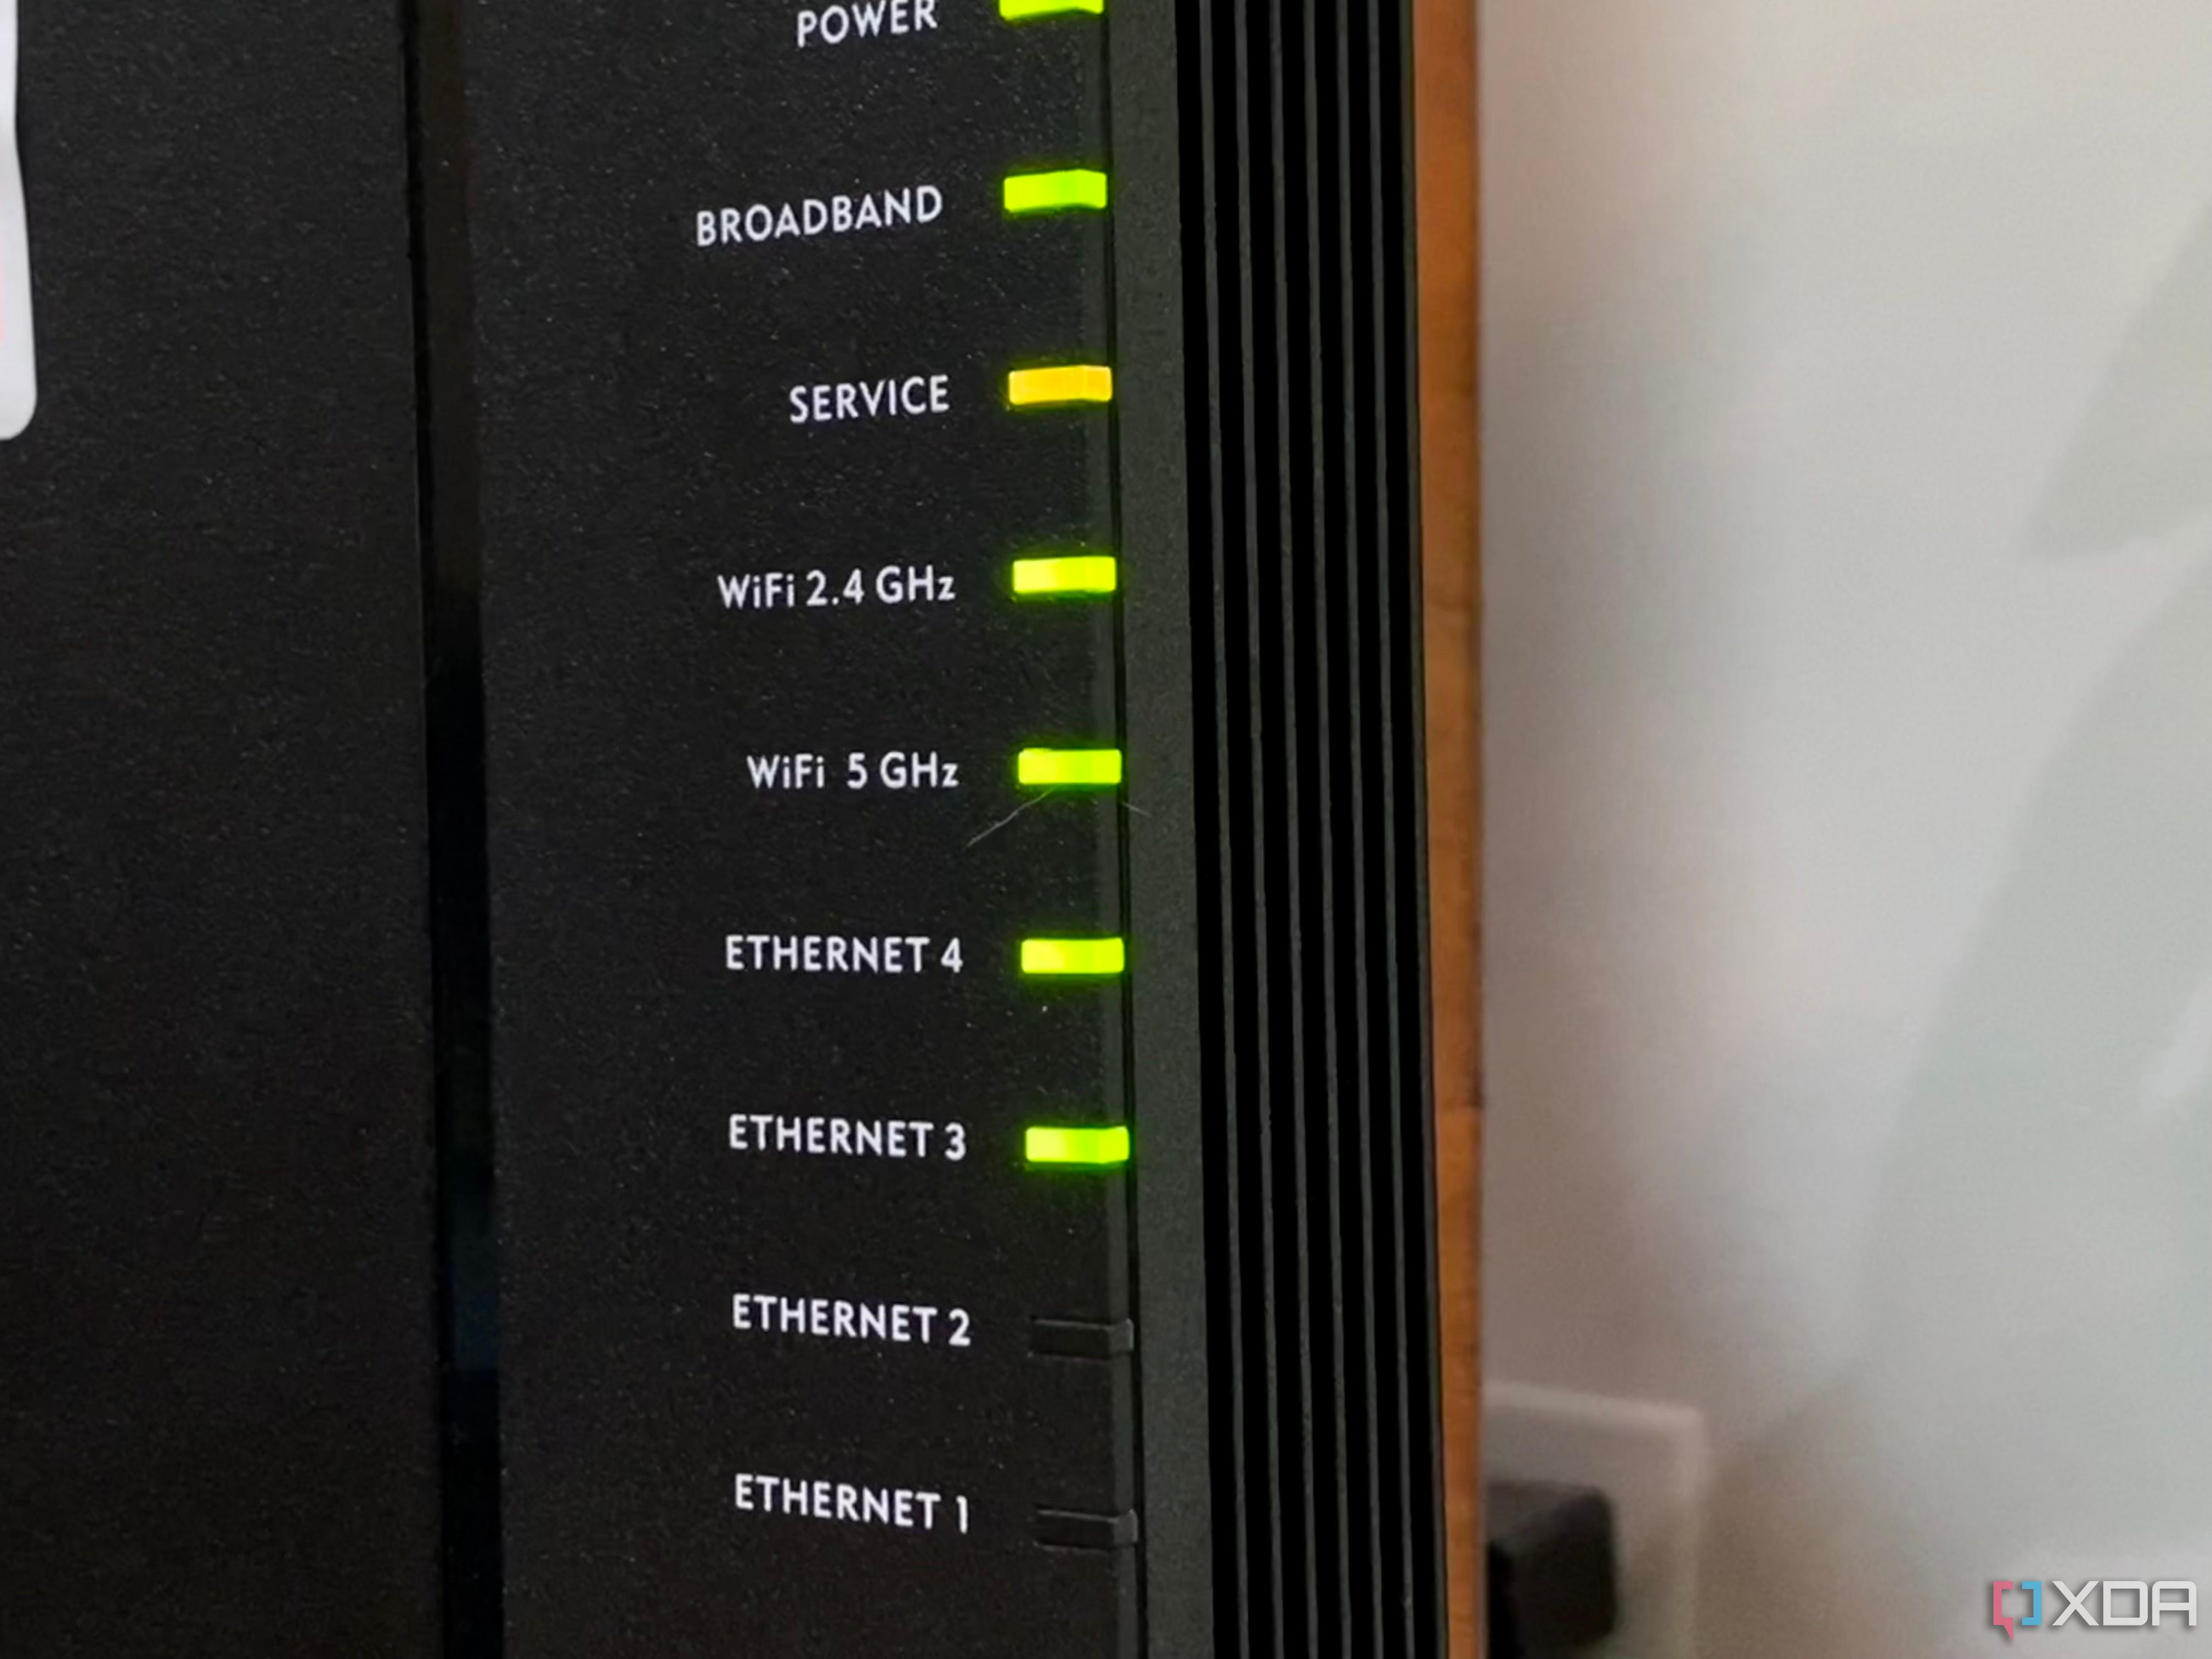 Do I need a modem and router?